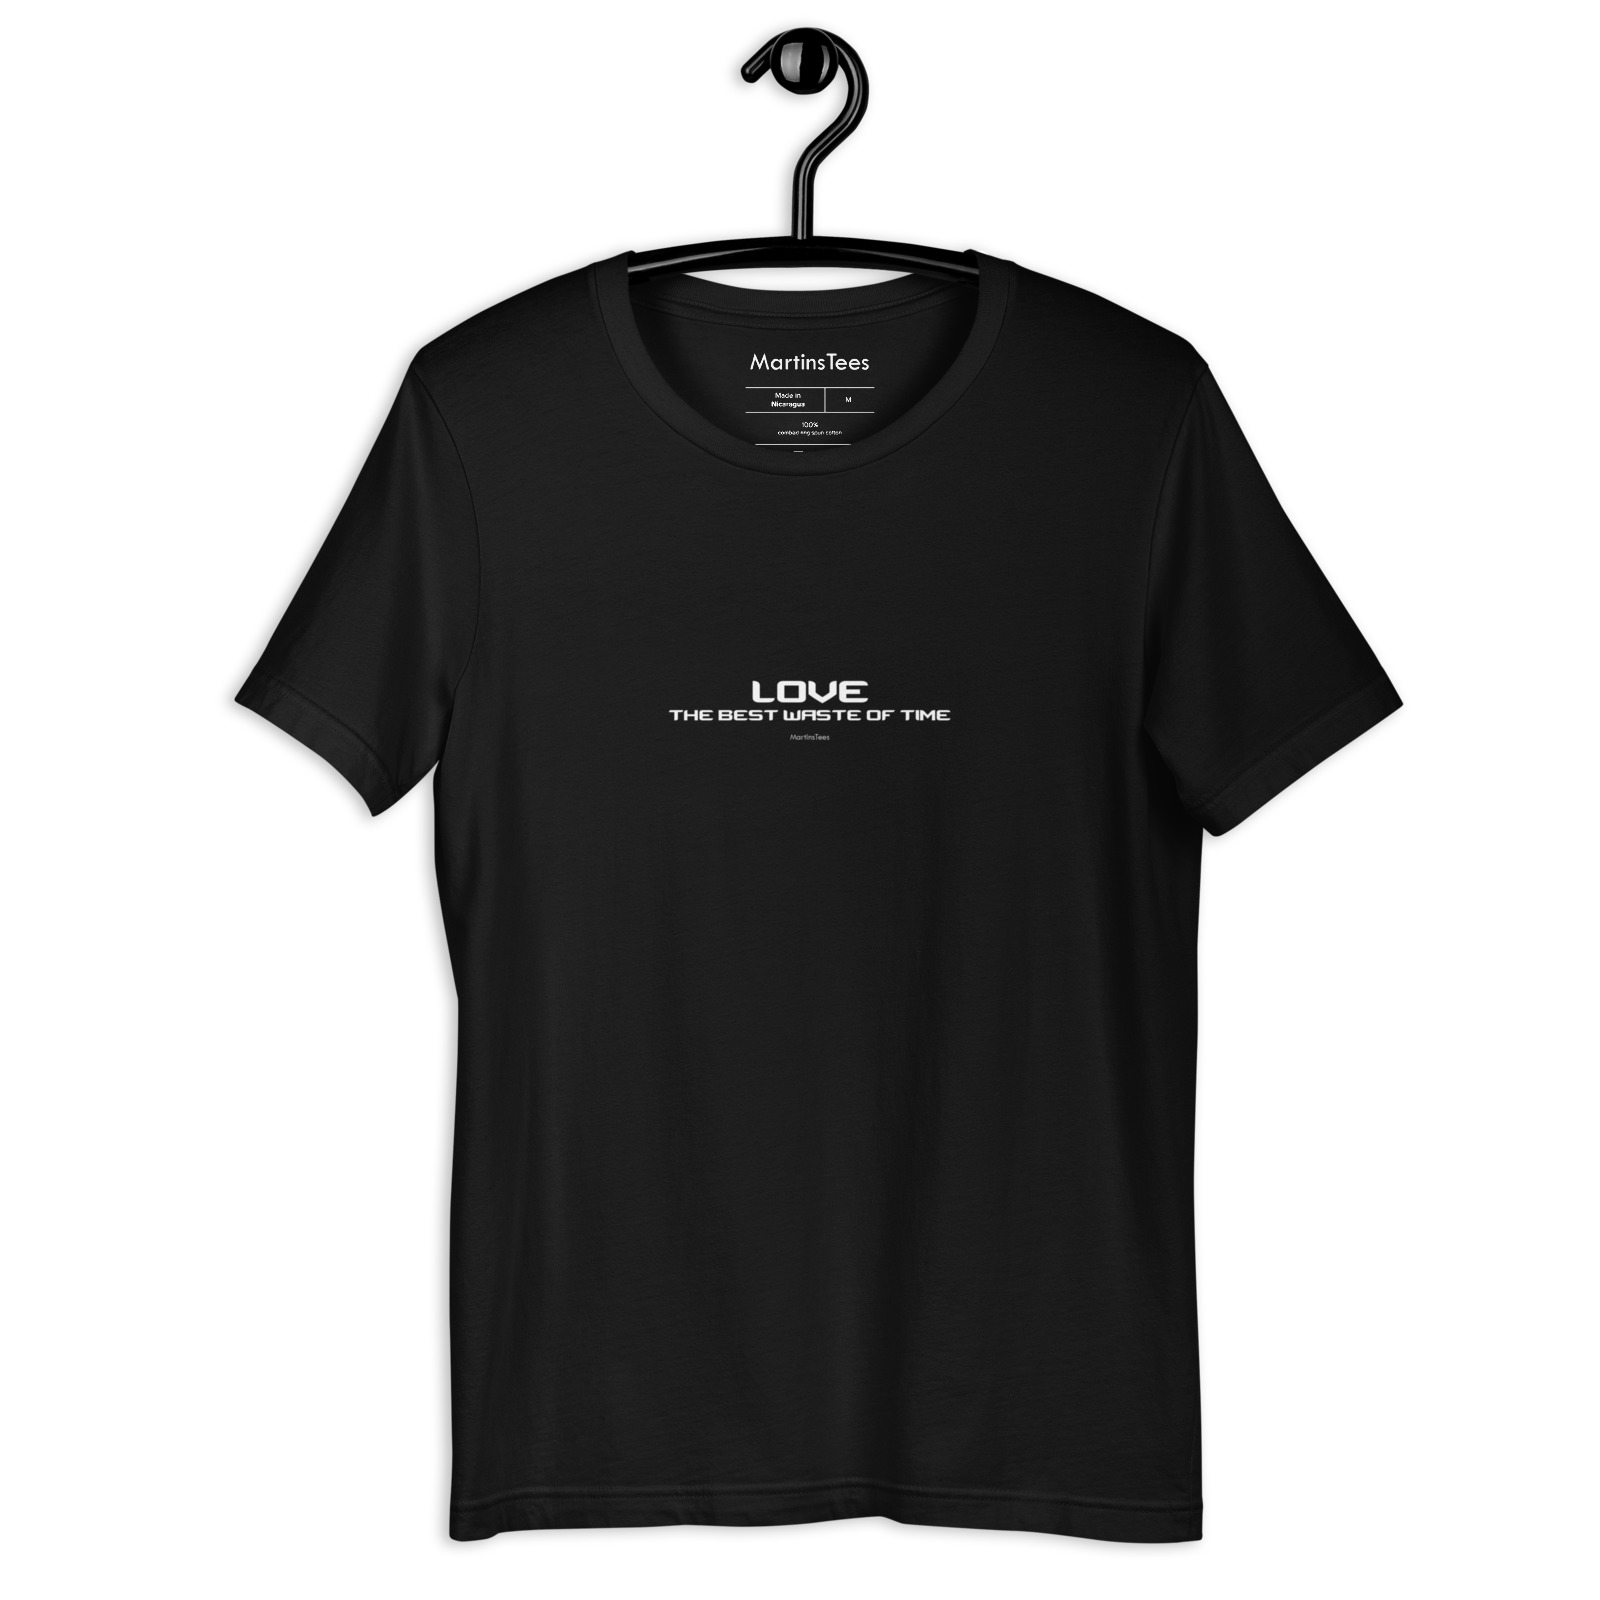 T-shirt: LOVE - THE BEST WASTE OF TIME